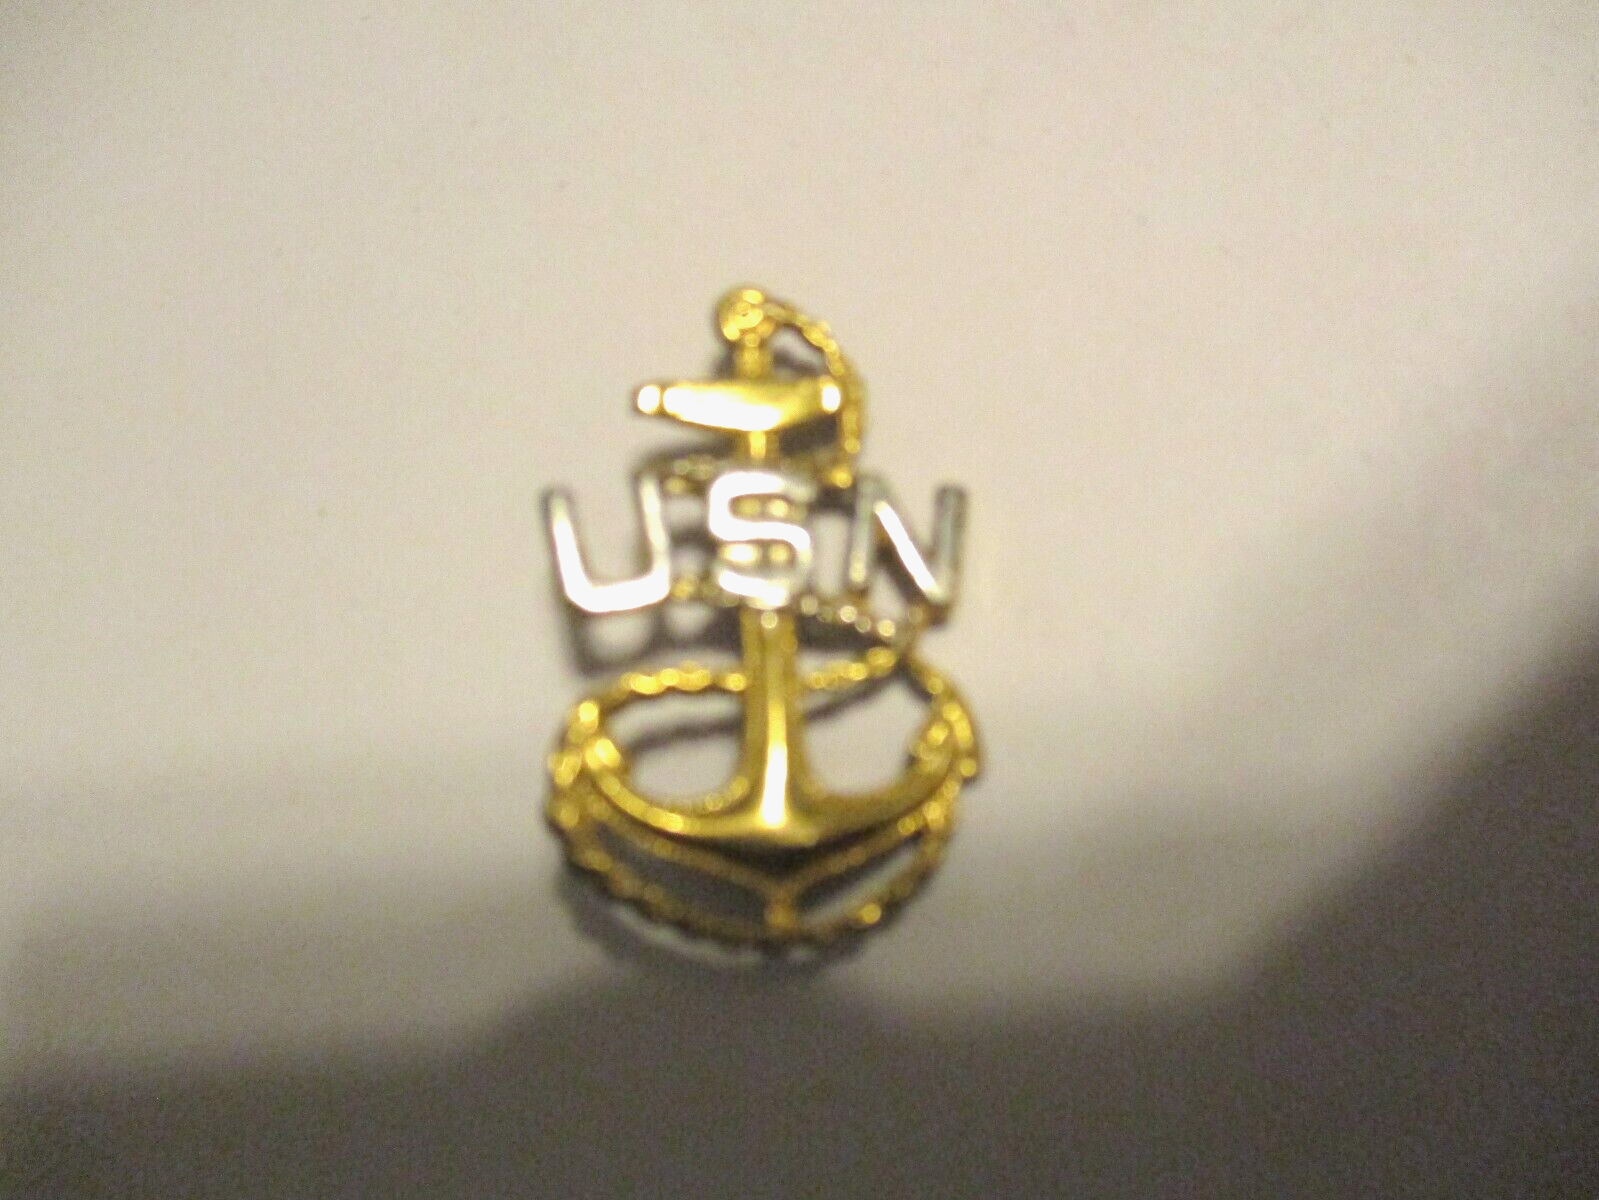 WW11 U.S.NAVY CHIEF PETTY OFFICER INSIGNIA CAP BADGE STERLING SILVER ANCHOR USN